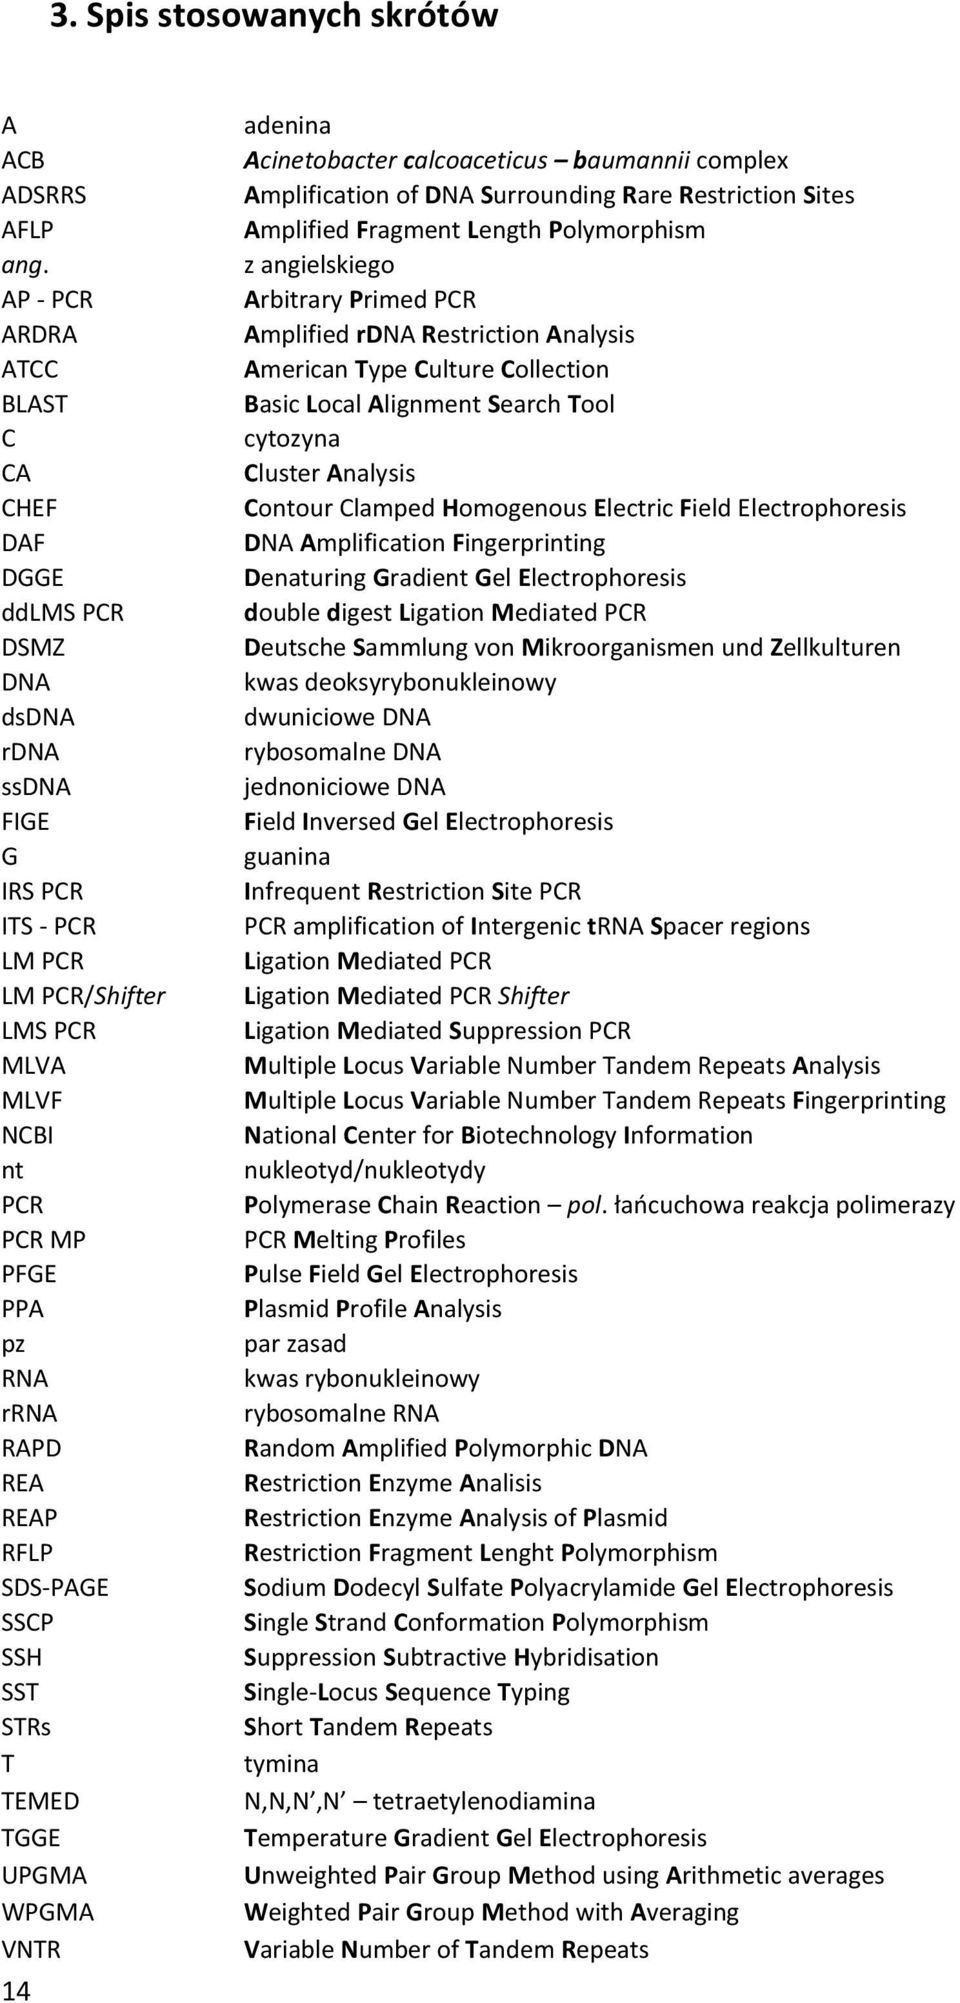 RFLP SDS-PAGE SSCP SSH SST STRs T TEMED TGGE UPGMA WPGMA VNTR 14 adenina Acinetobacter calcoaceticus baumannii complex Amplification of DNA Surrounding Rare Restriction Sites Amplified Fragment